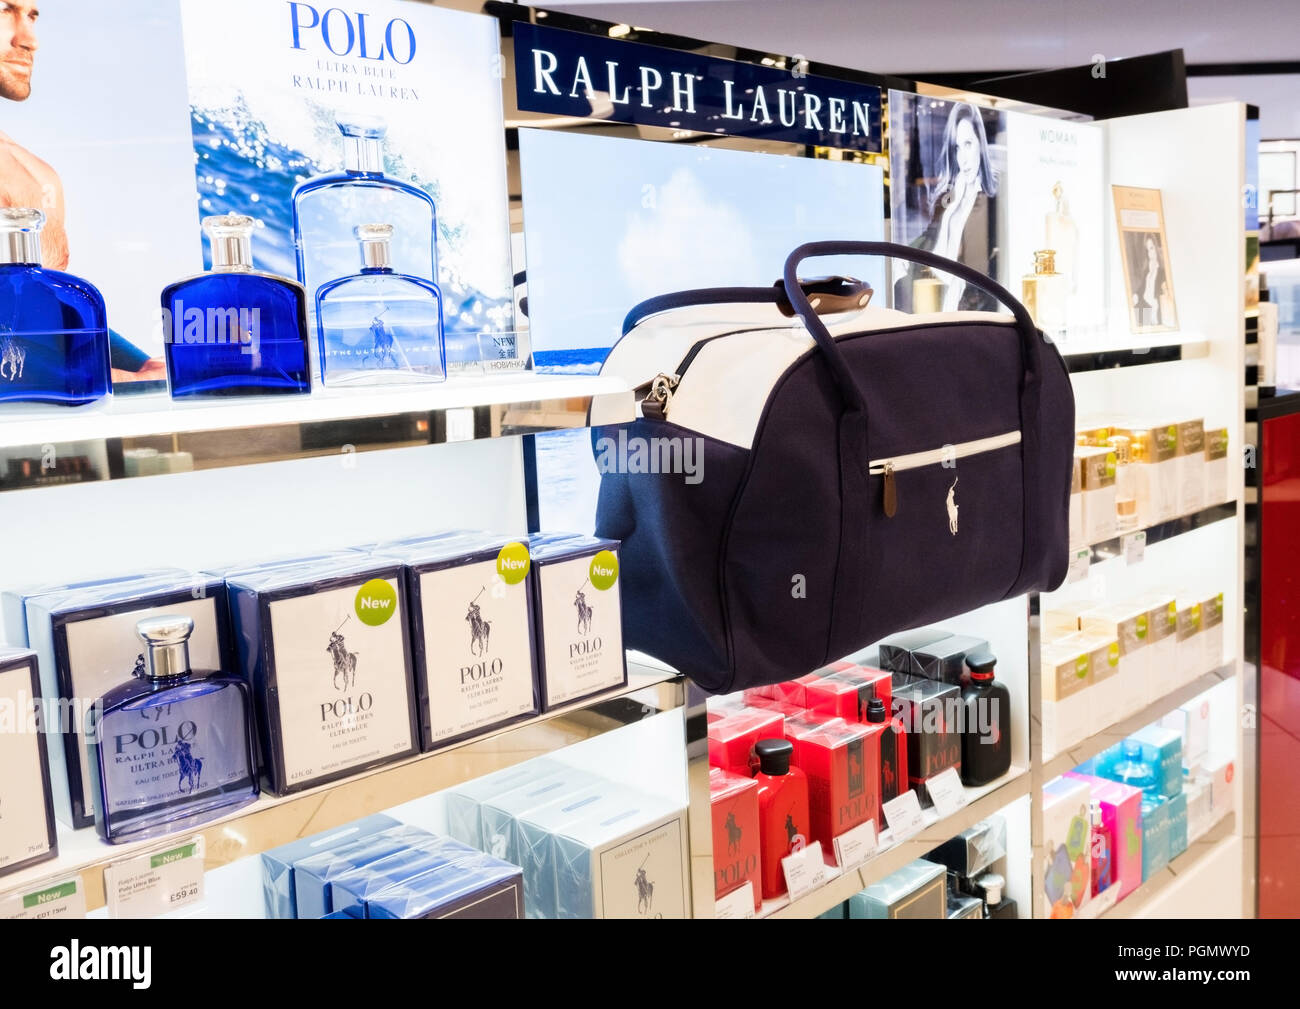 Ralph Lauren Perfume High Resolution Stock Photography and Images - Alamy